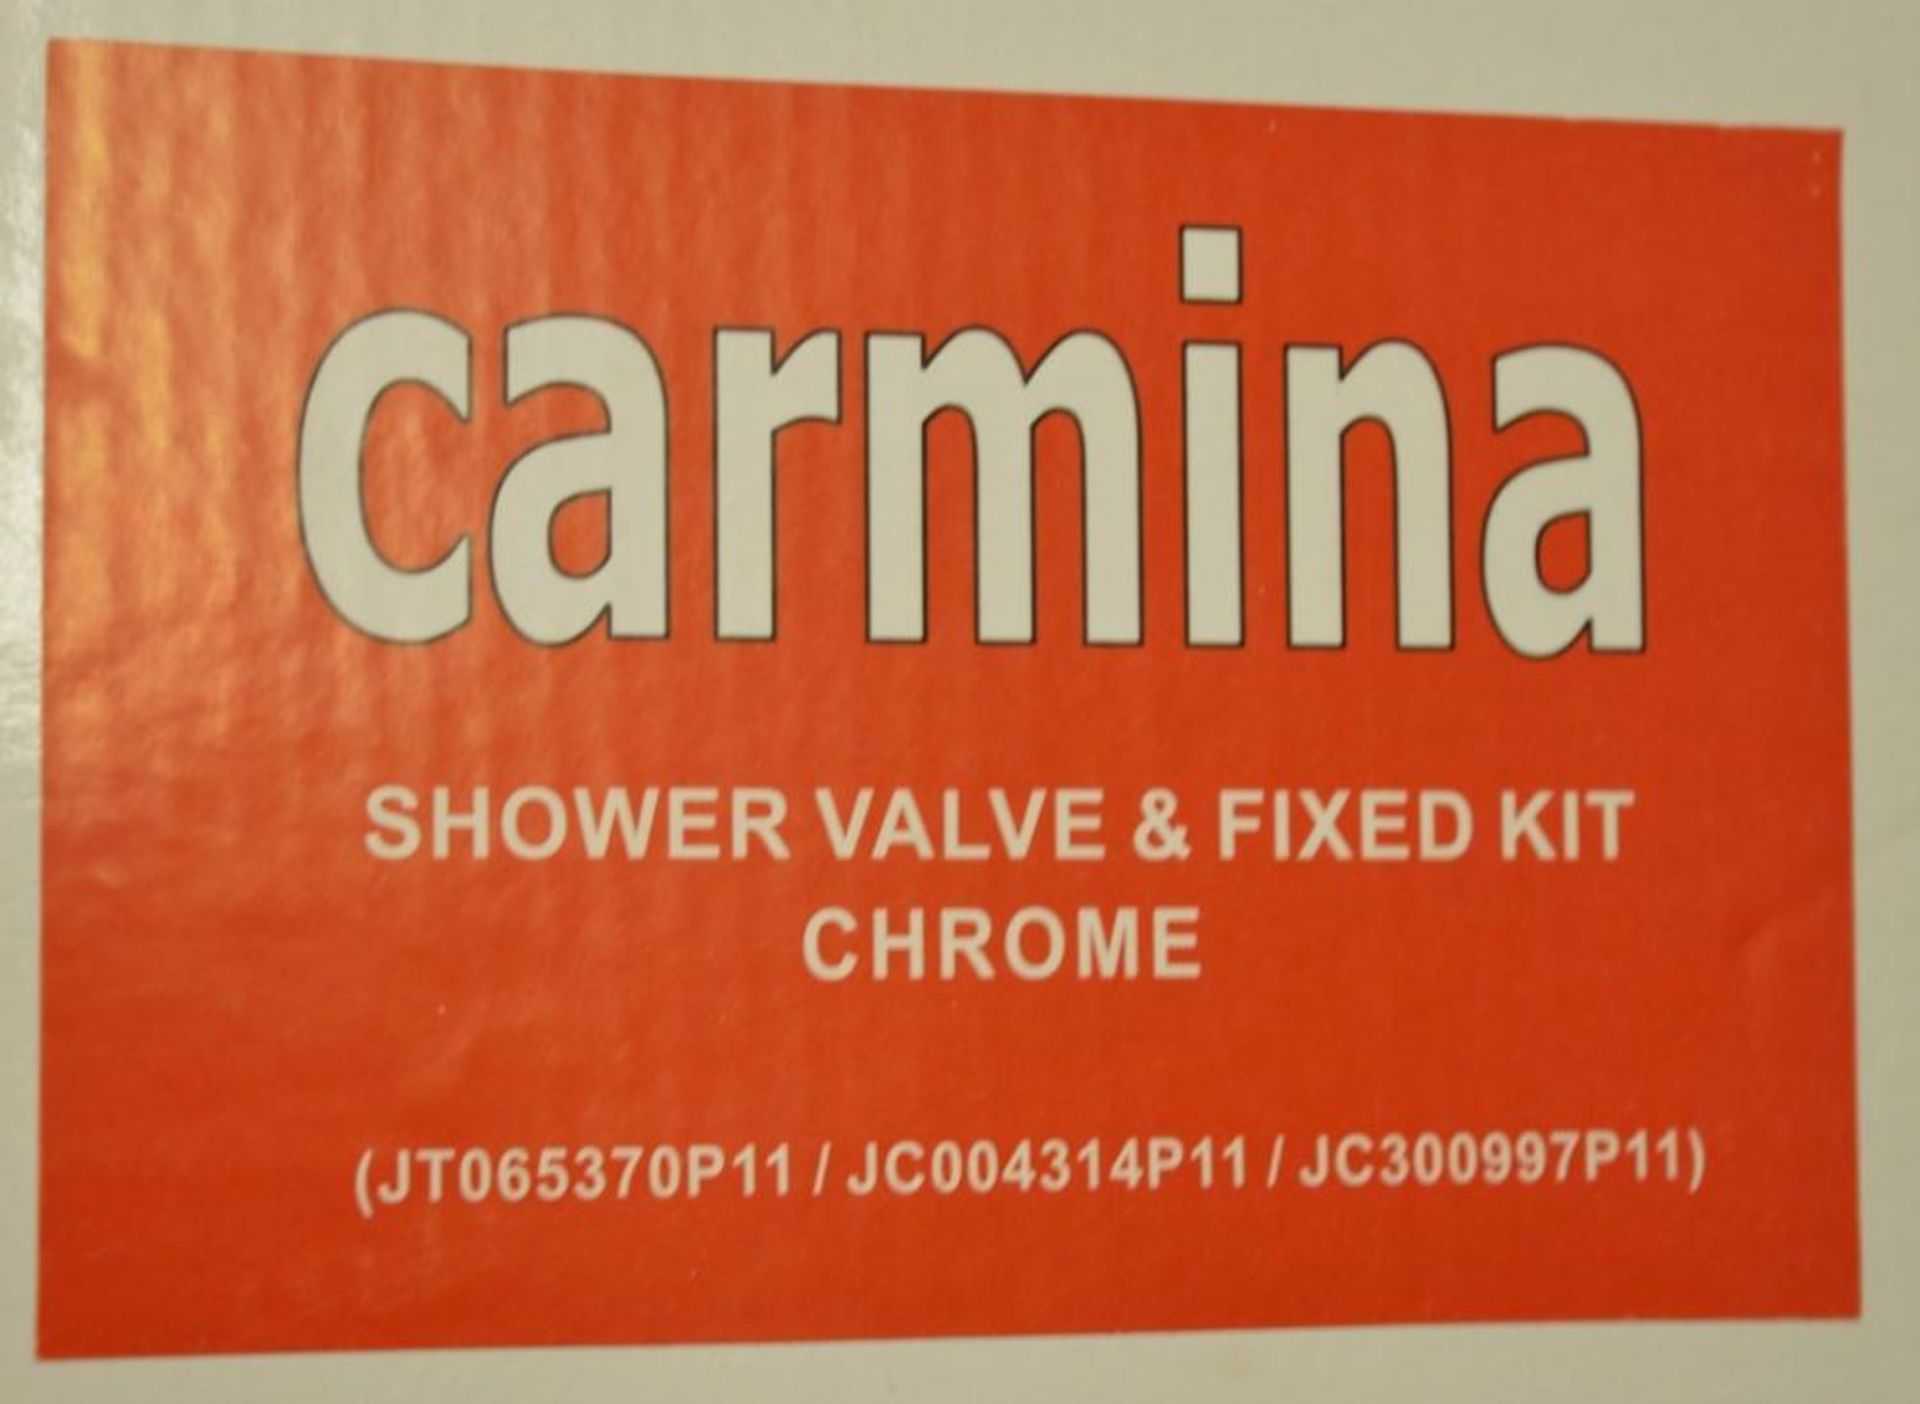 5 x Carmina Shower Valve Kit - Contains Chrome Shower Head, Fixed Arm and Manual Control - Image 6 of 13